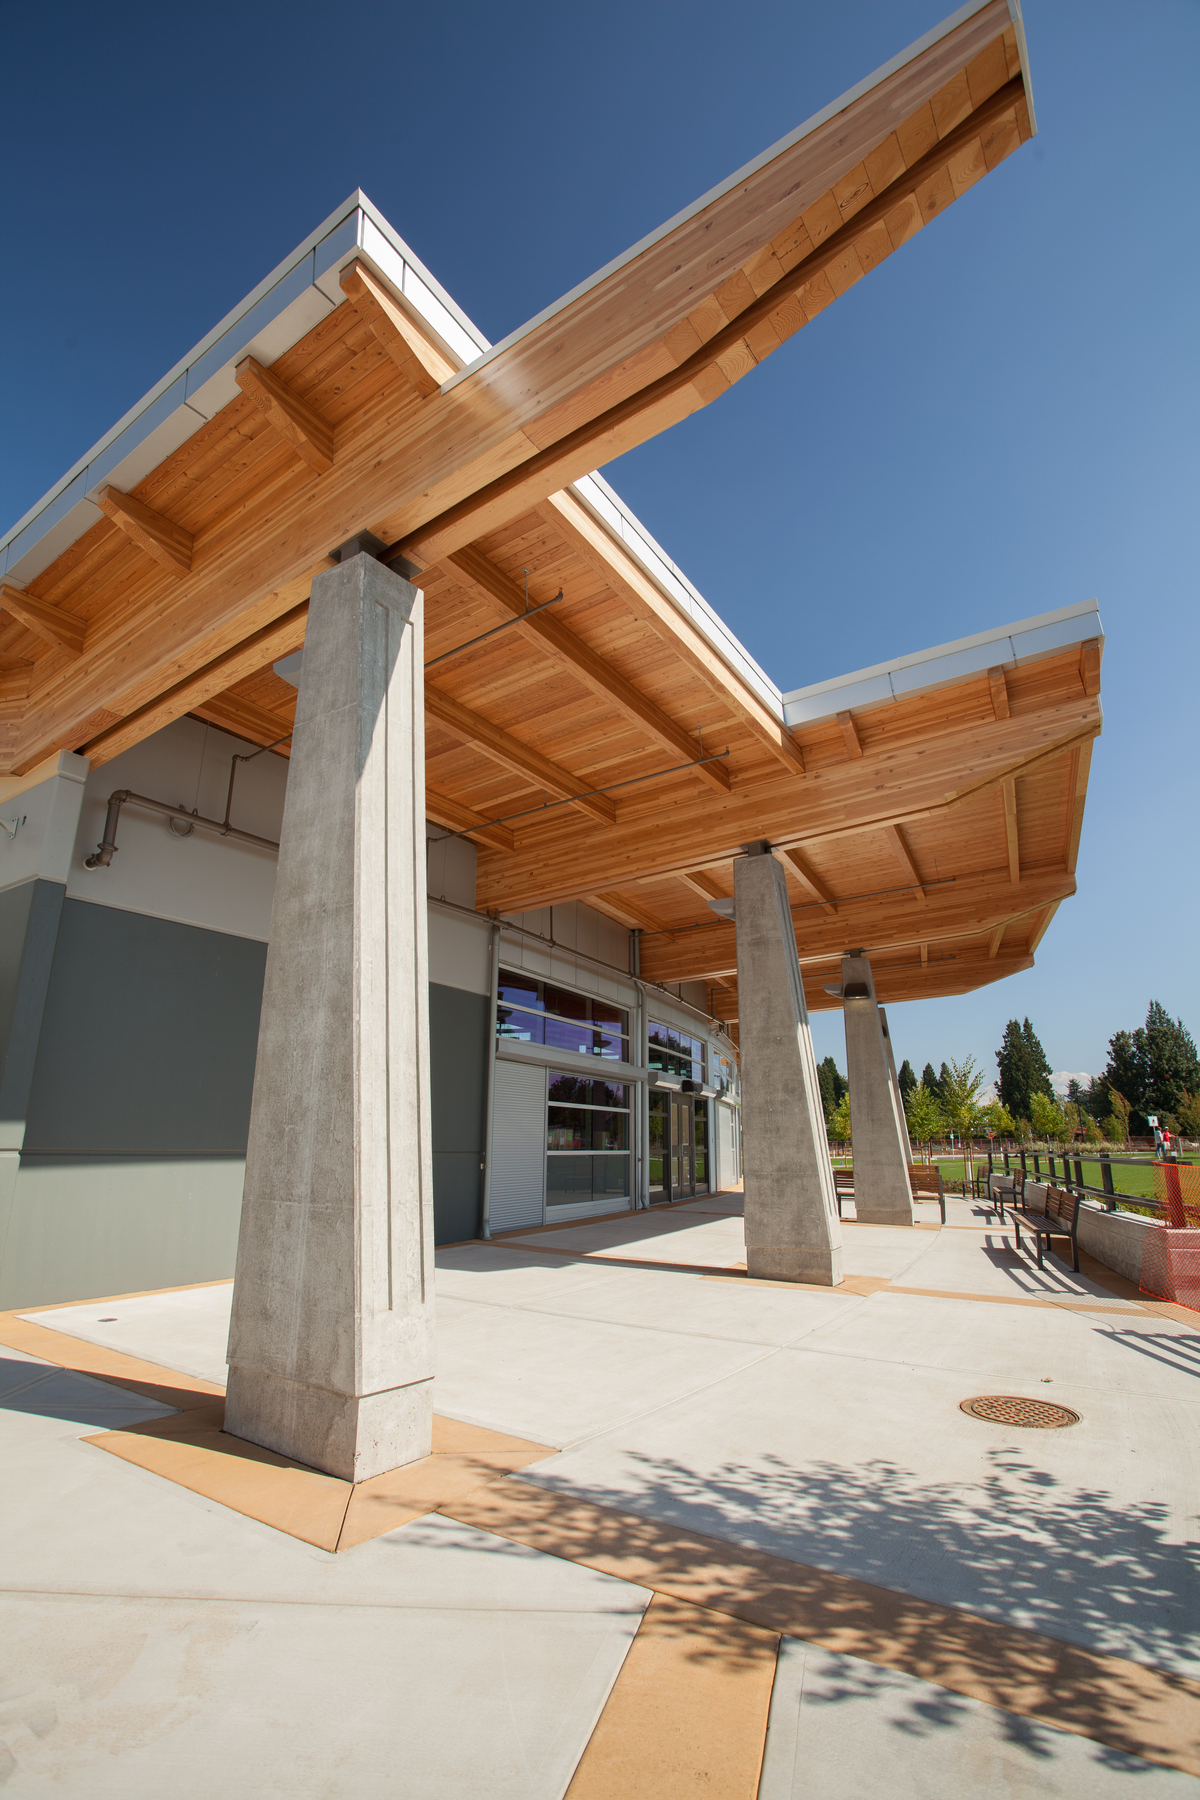 Exterior sunny daytime view of Abbotsford Senior Secondary School showing Glue-laminated timber (Glulam) beams supporting additional mass timber elements and lumber which makes up roof